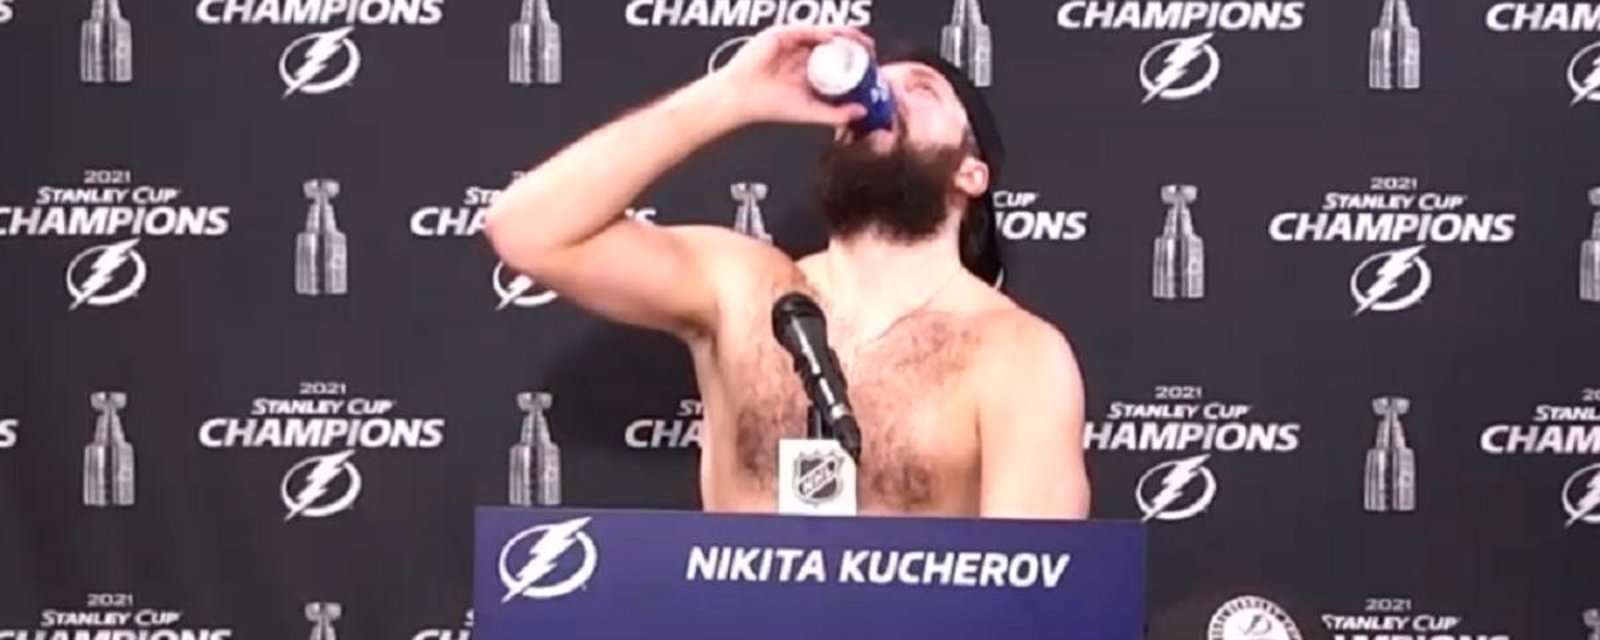 Kucherov pulls class act amidst controversial Cup celebrations 